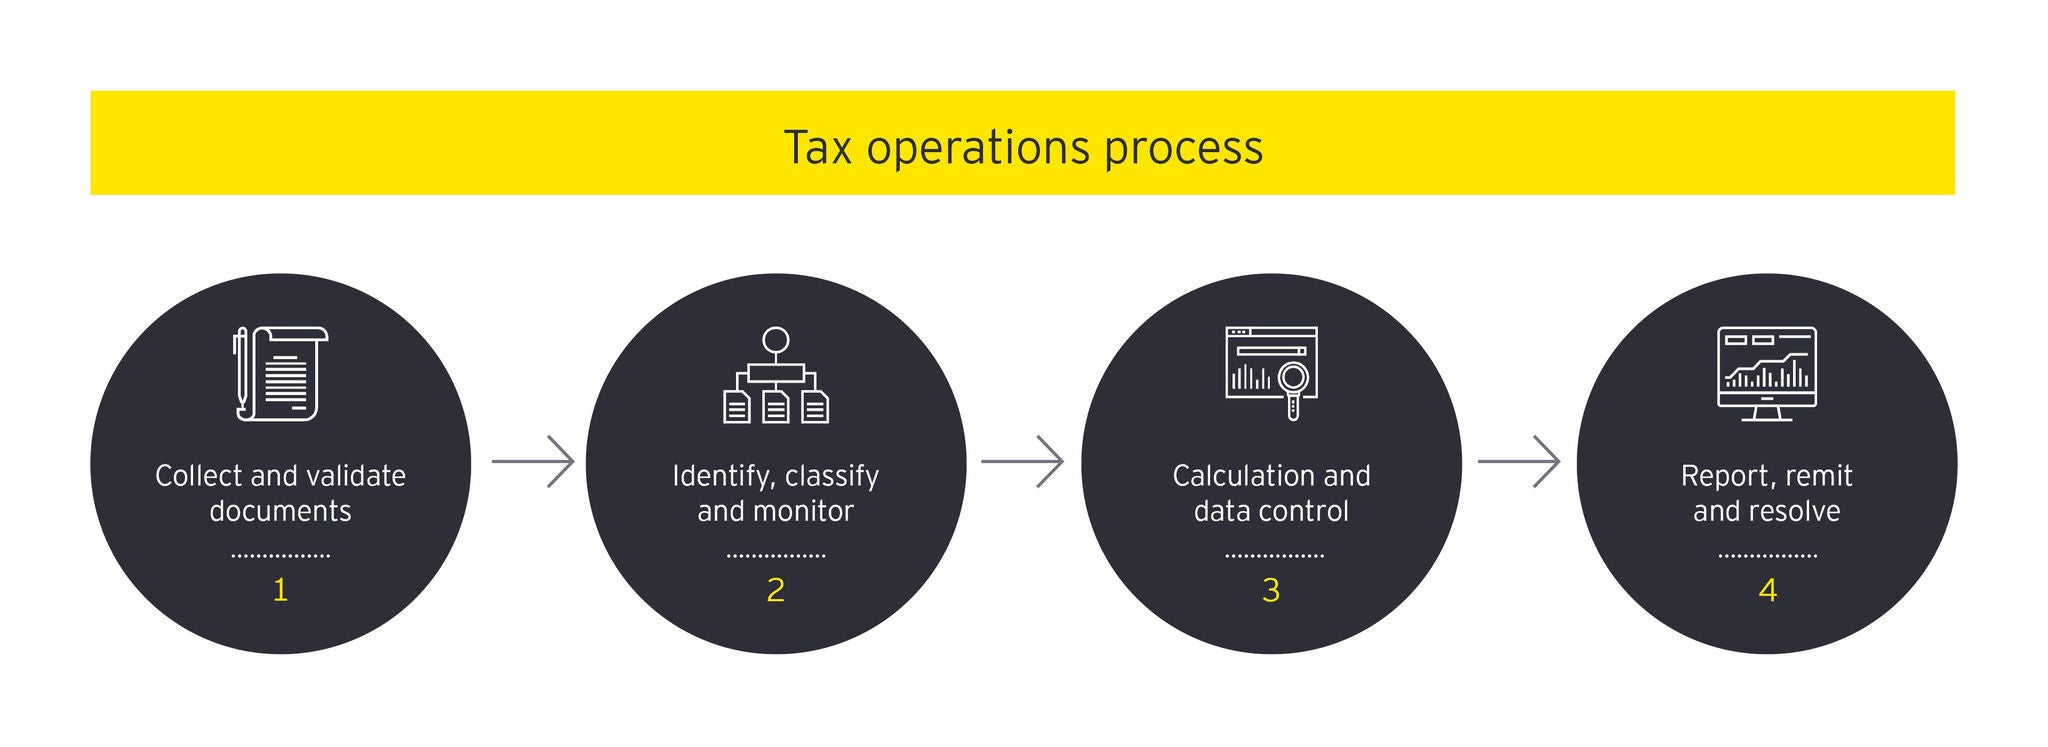 EY Tax operation